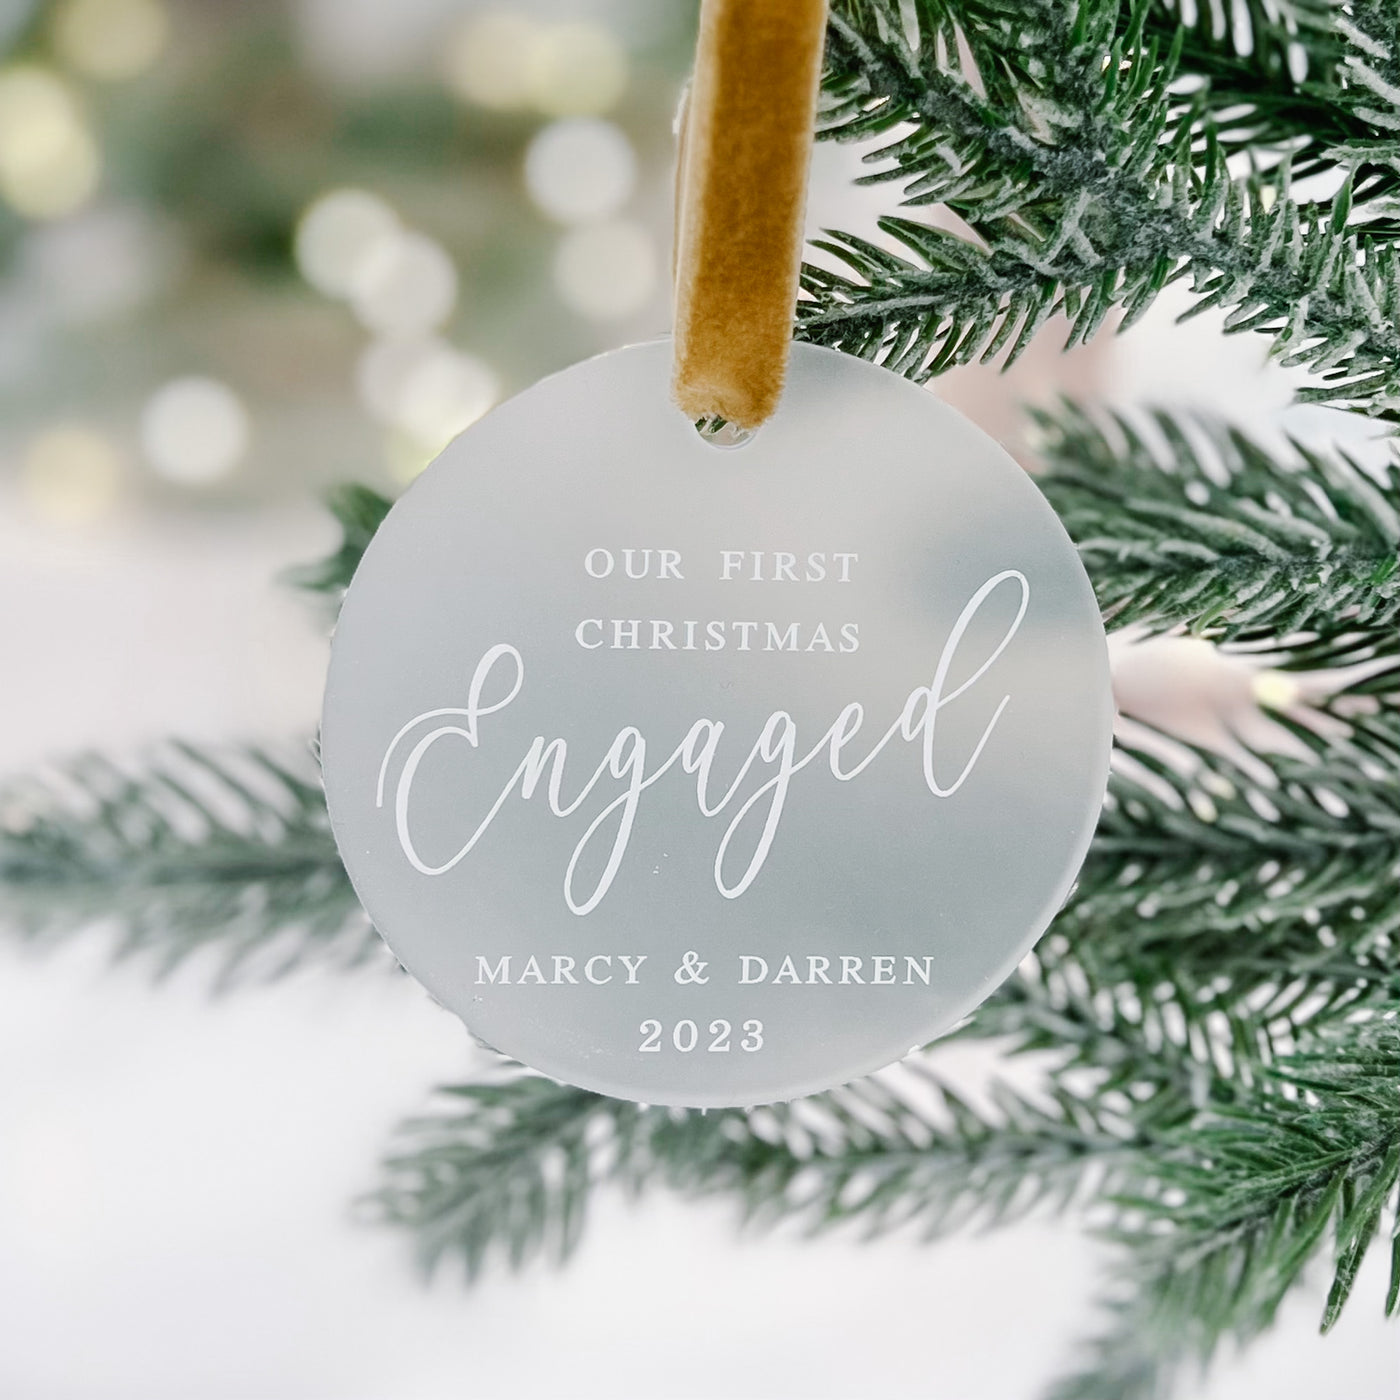 Our First Christmas Engaged Ornament